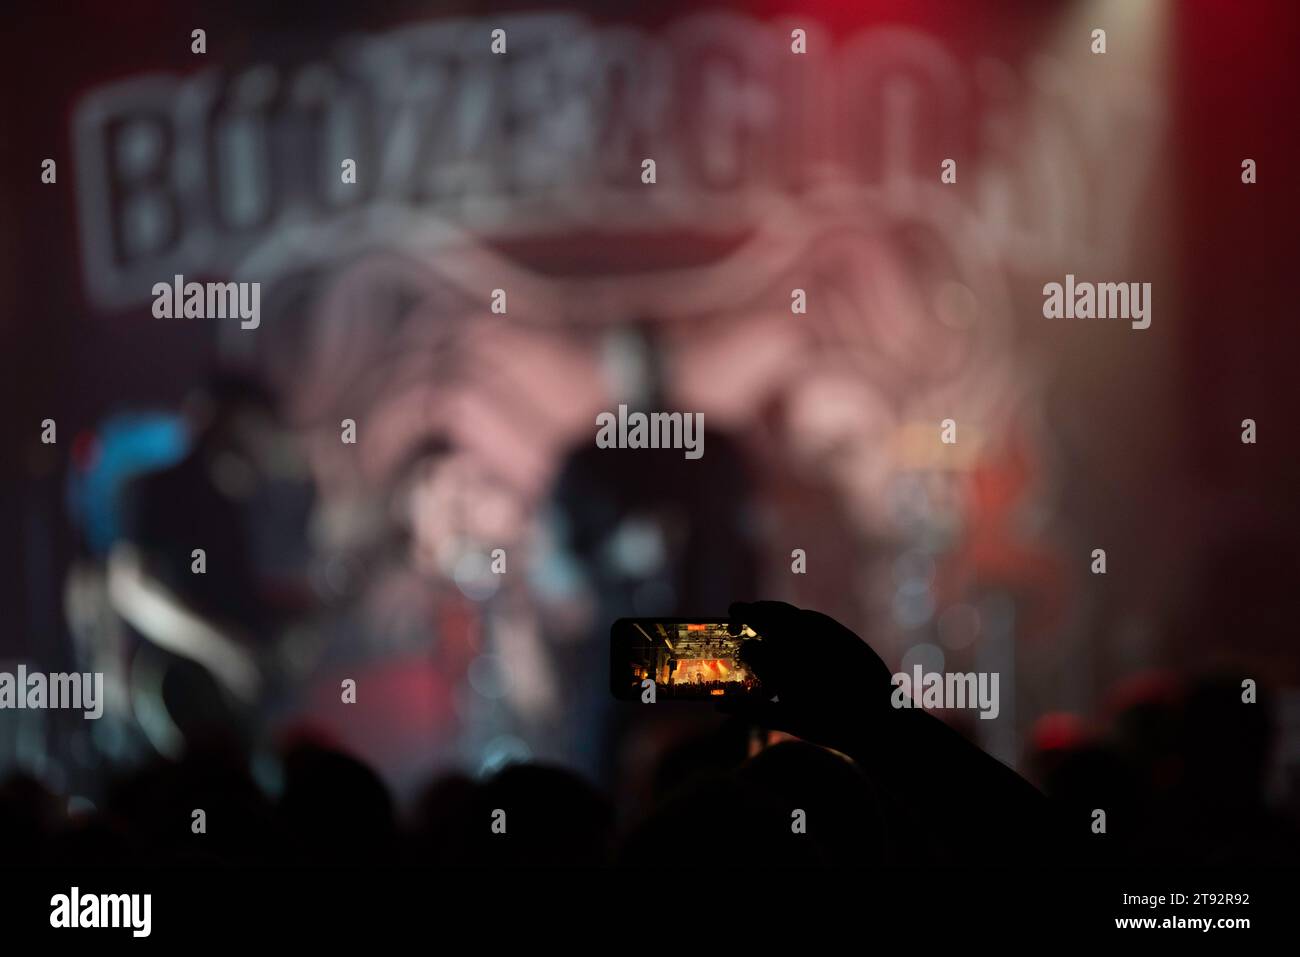 British band, Booze And Glory, performing live at SO36 in Berlin , Germany, co-headlining with The Rumjacks. Stock Photo